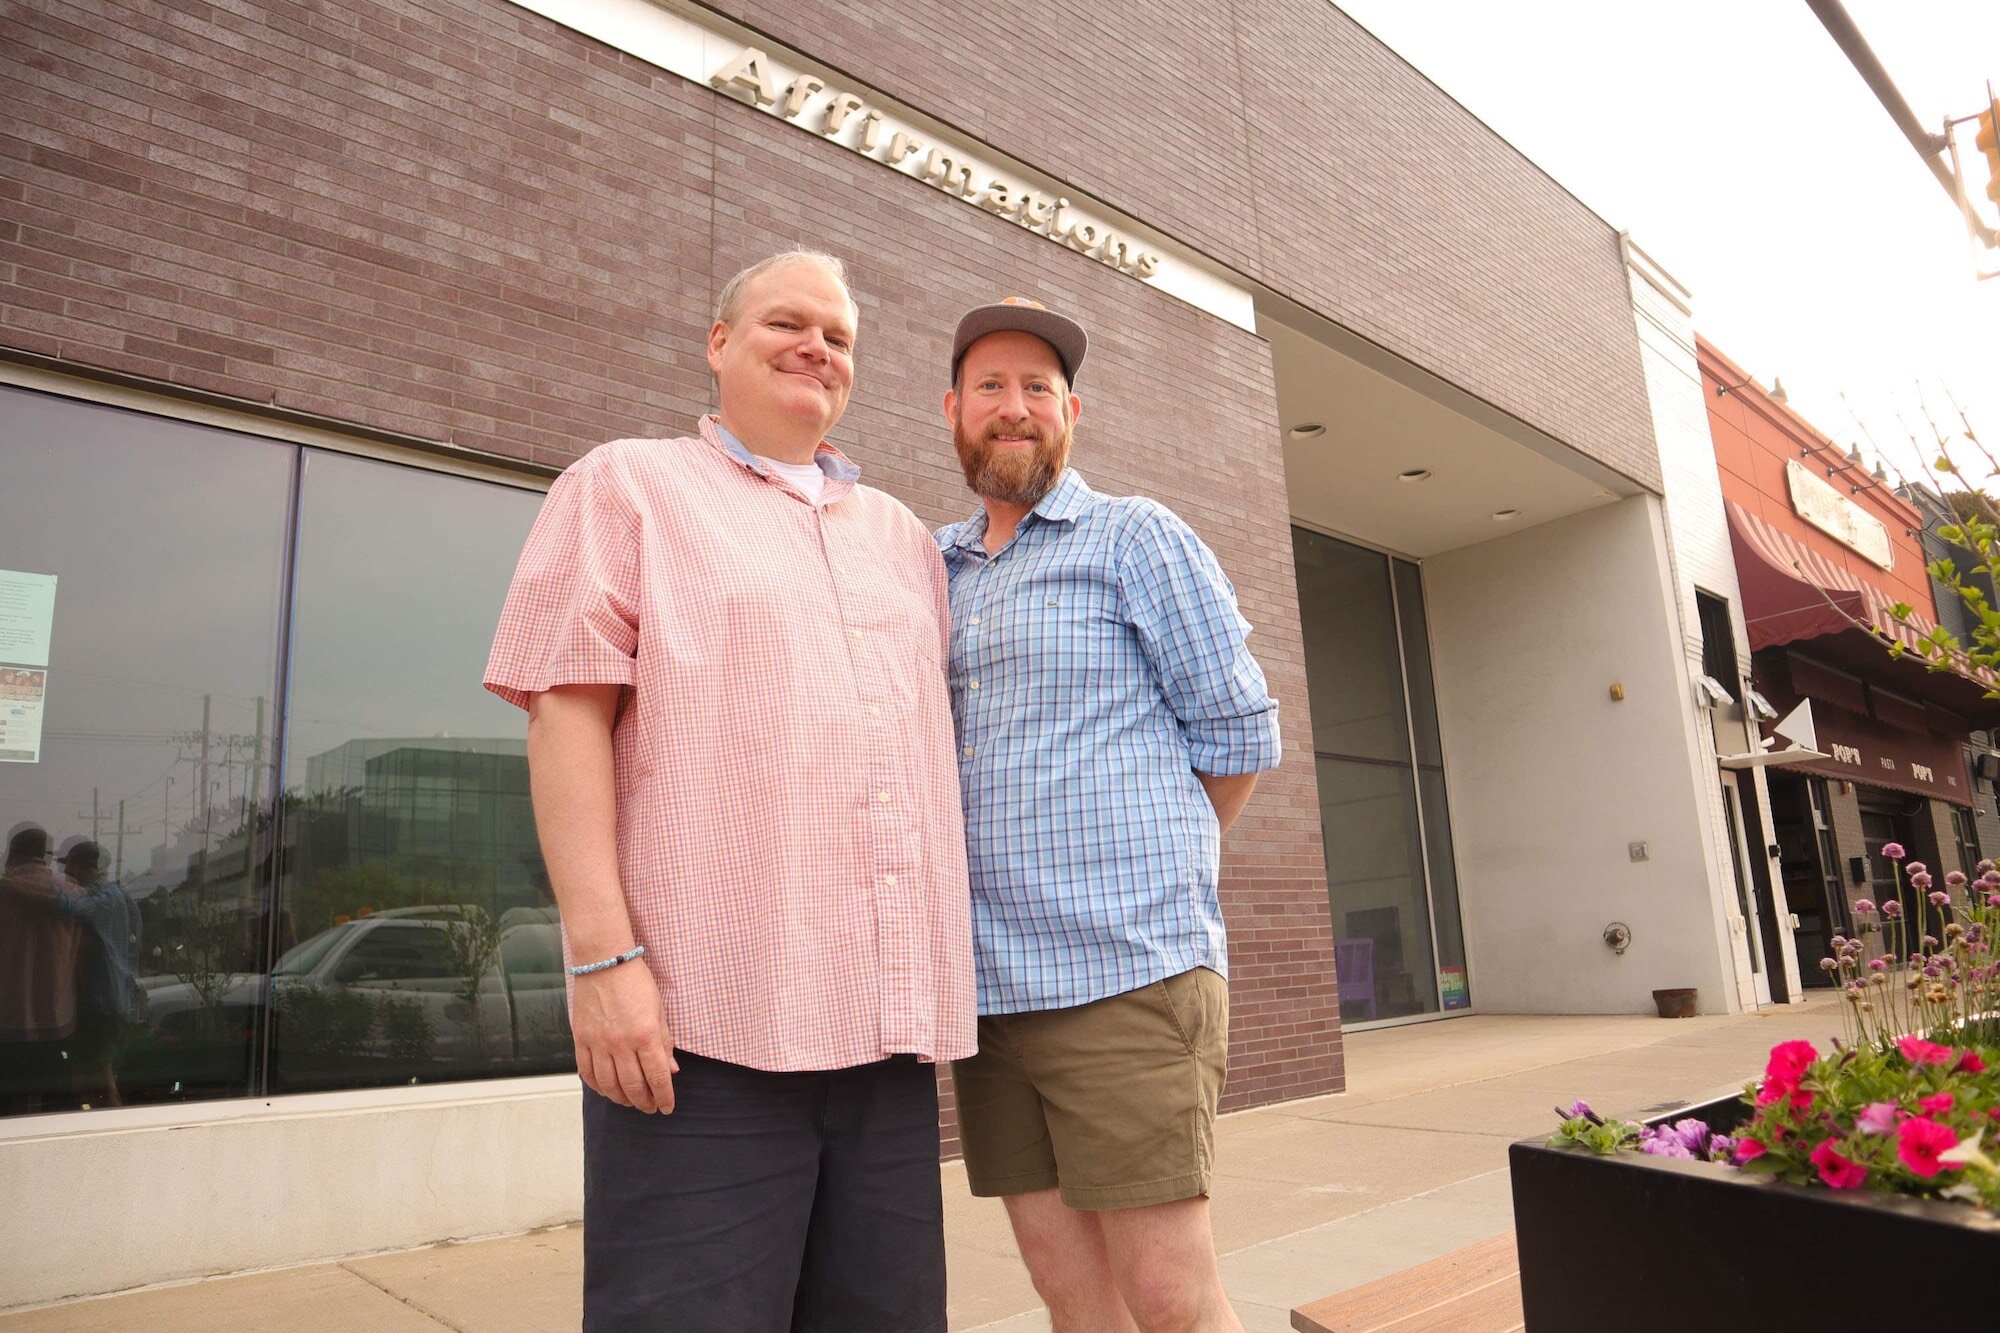 Artistic director Joe Bailey(left) stands beside his husband and theater co-founder Brandy Joe Plambeck(right). Plambeck is the media director for The Ringwald Theatre. 